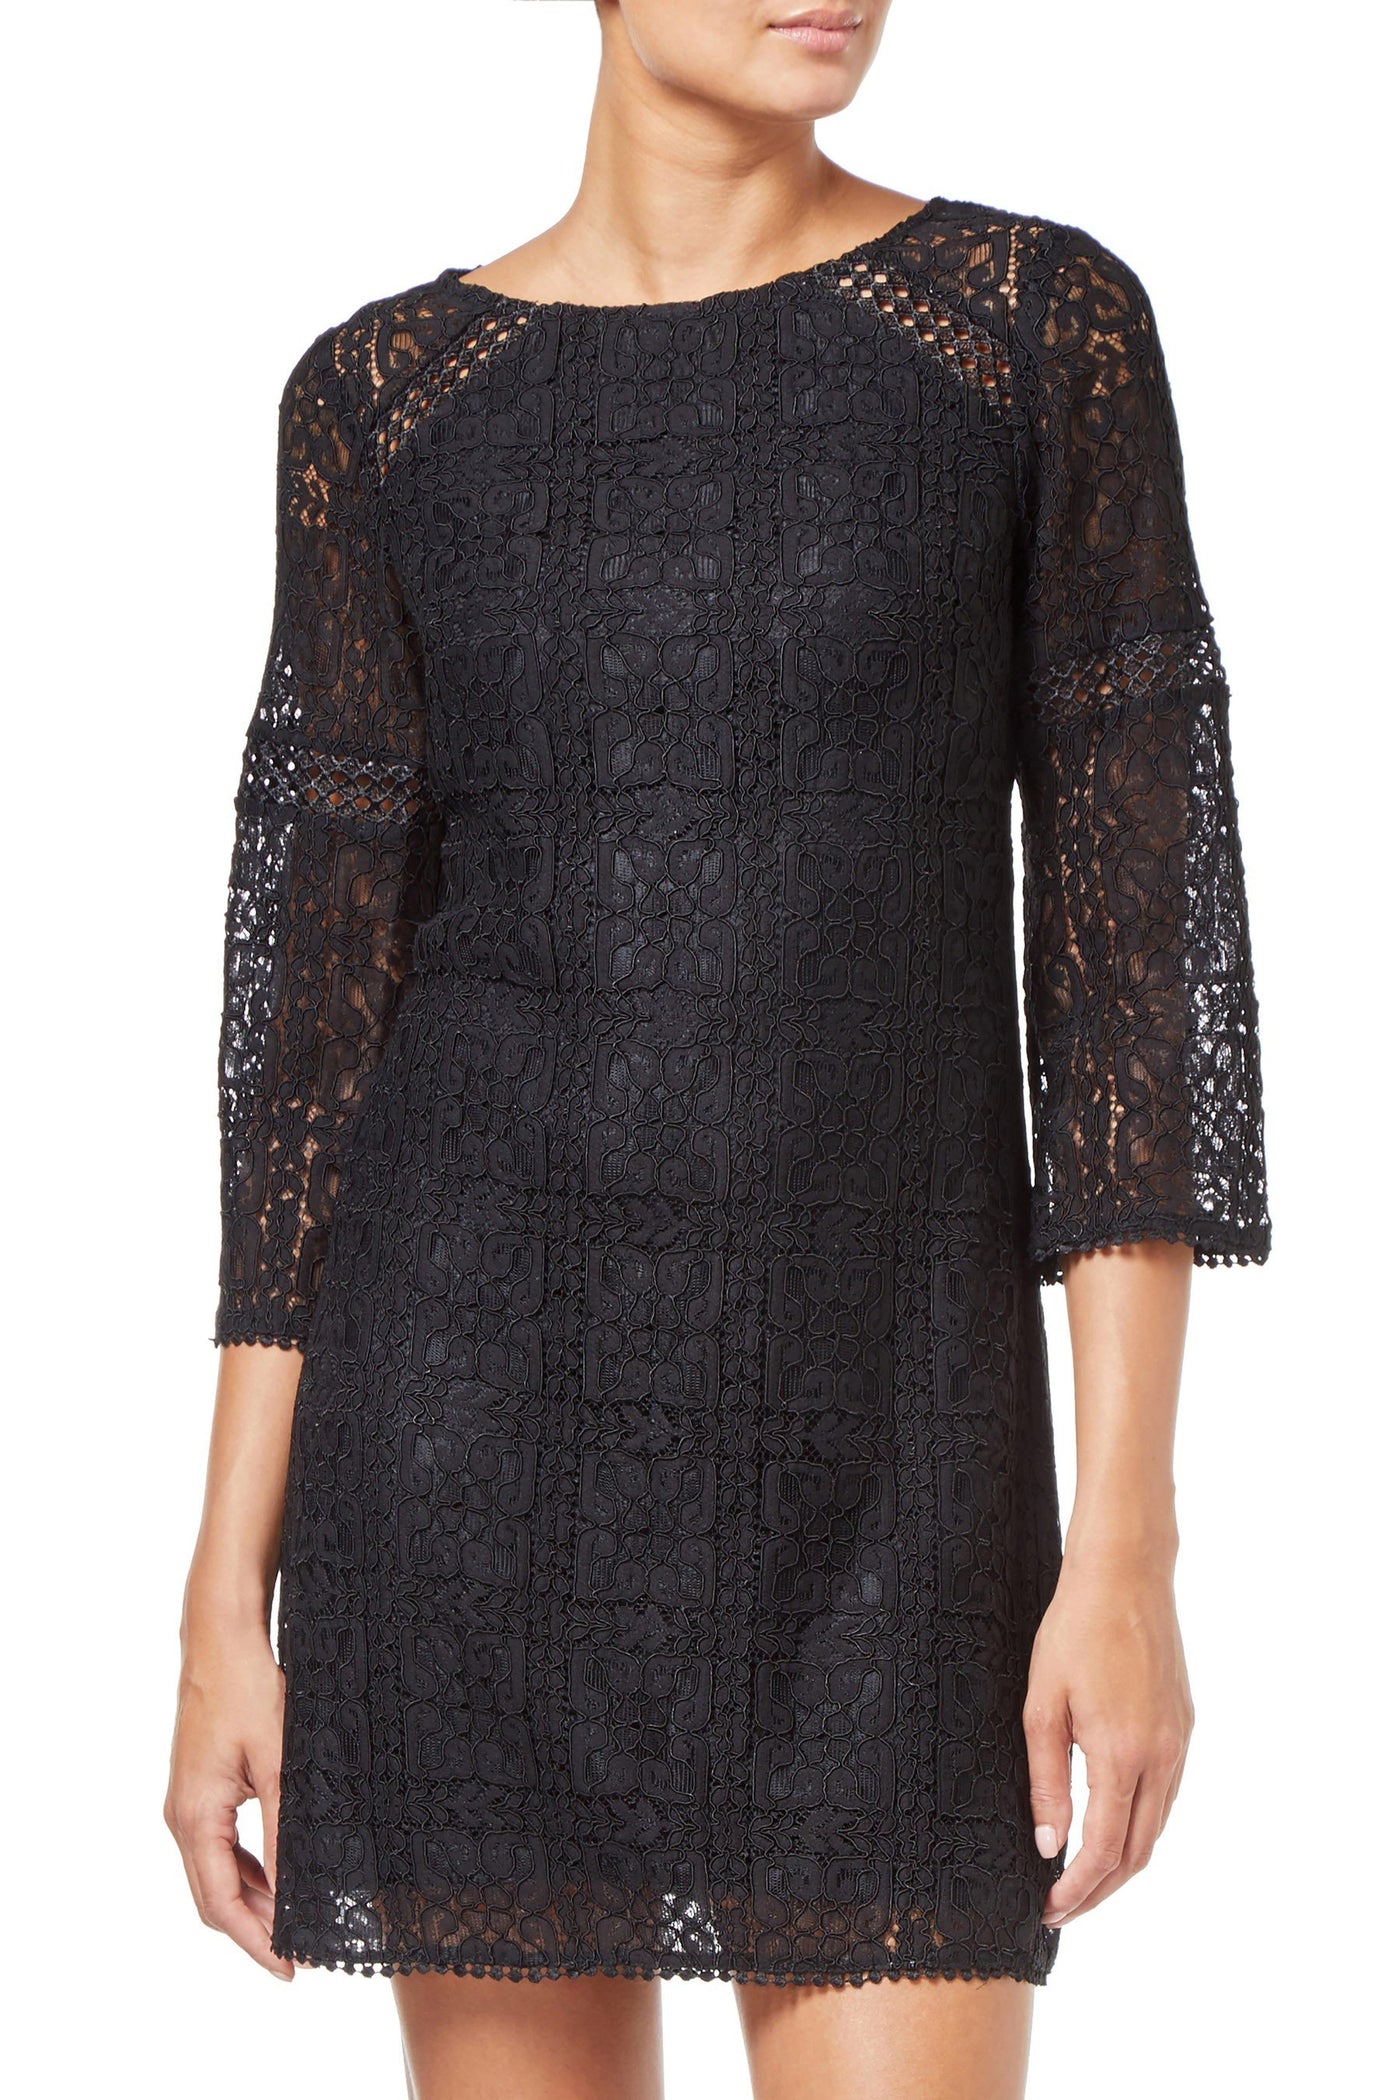 Adrianna Papell - AP1D102465 Quarter Length Sleeve Lace Shift Dress In Black